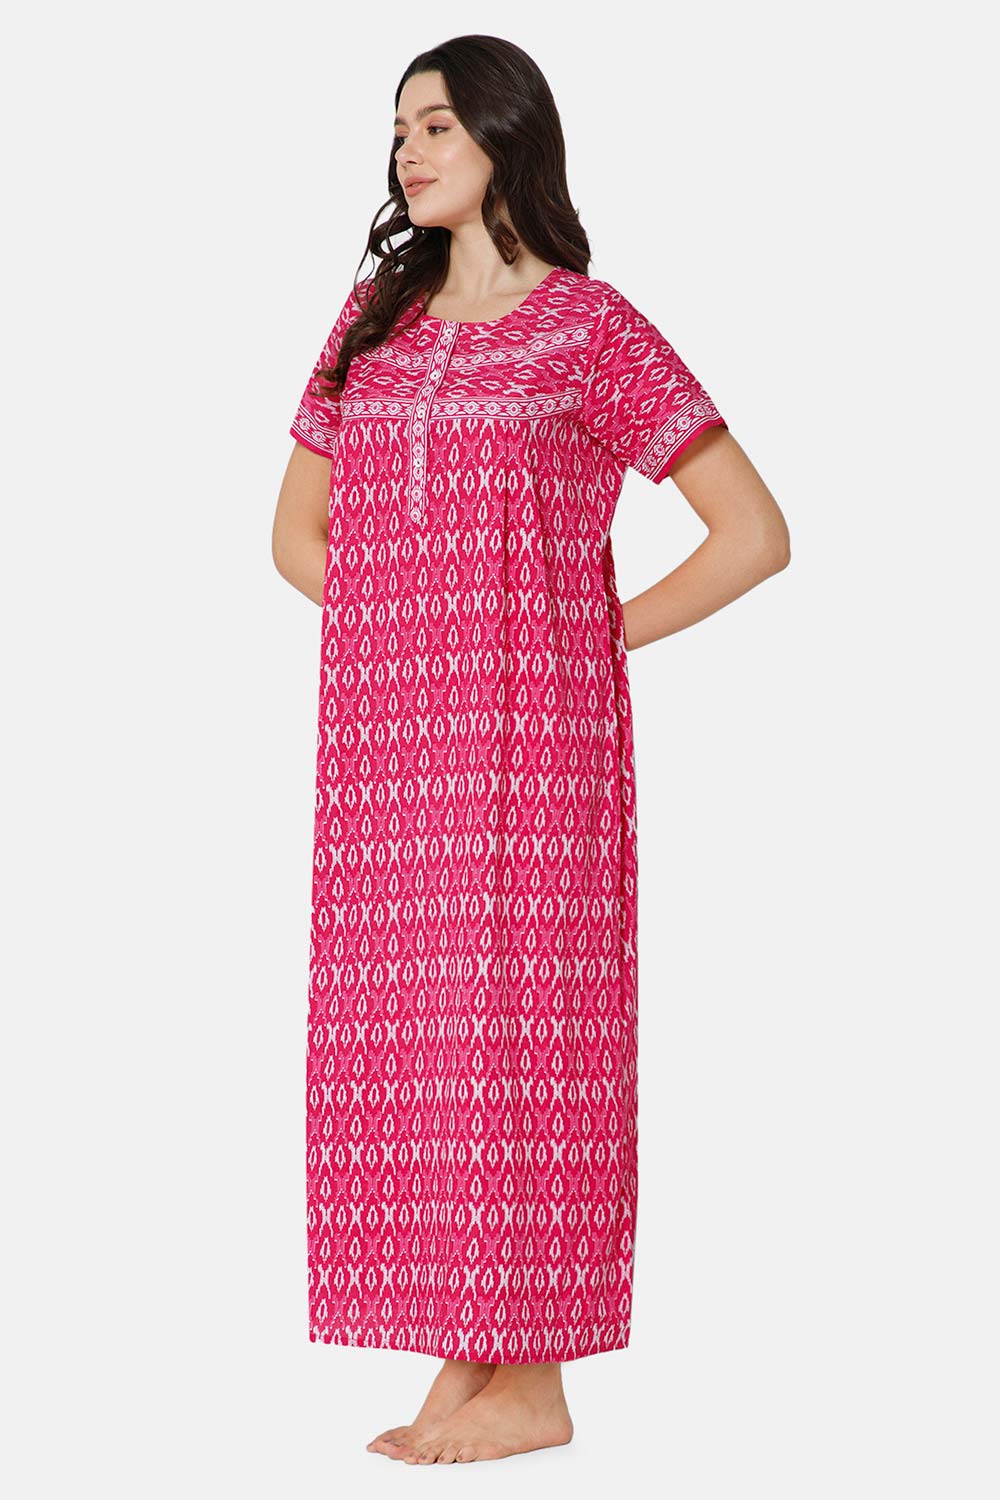 Naidu Hall A-line Front Open Women's Nighty Full Length Half Sleeve  - Pink - R131